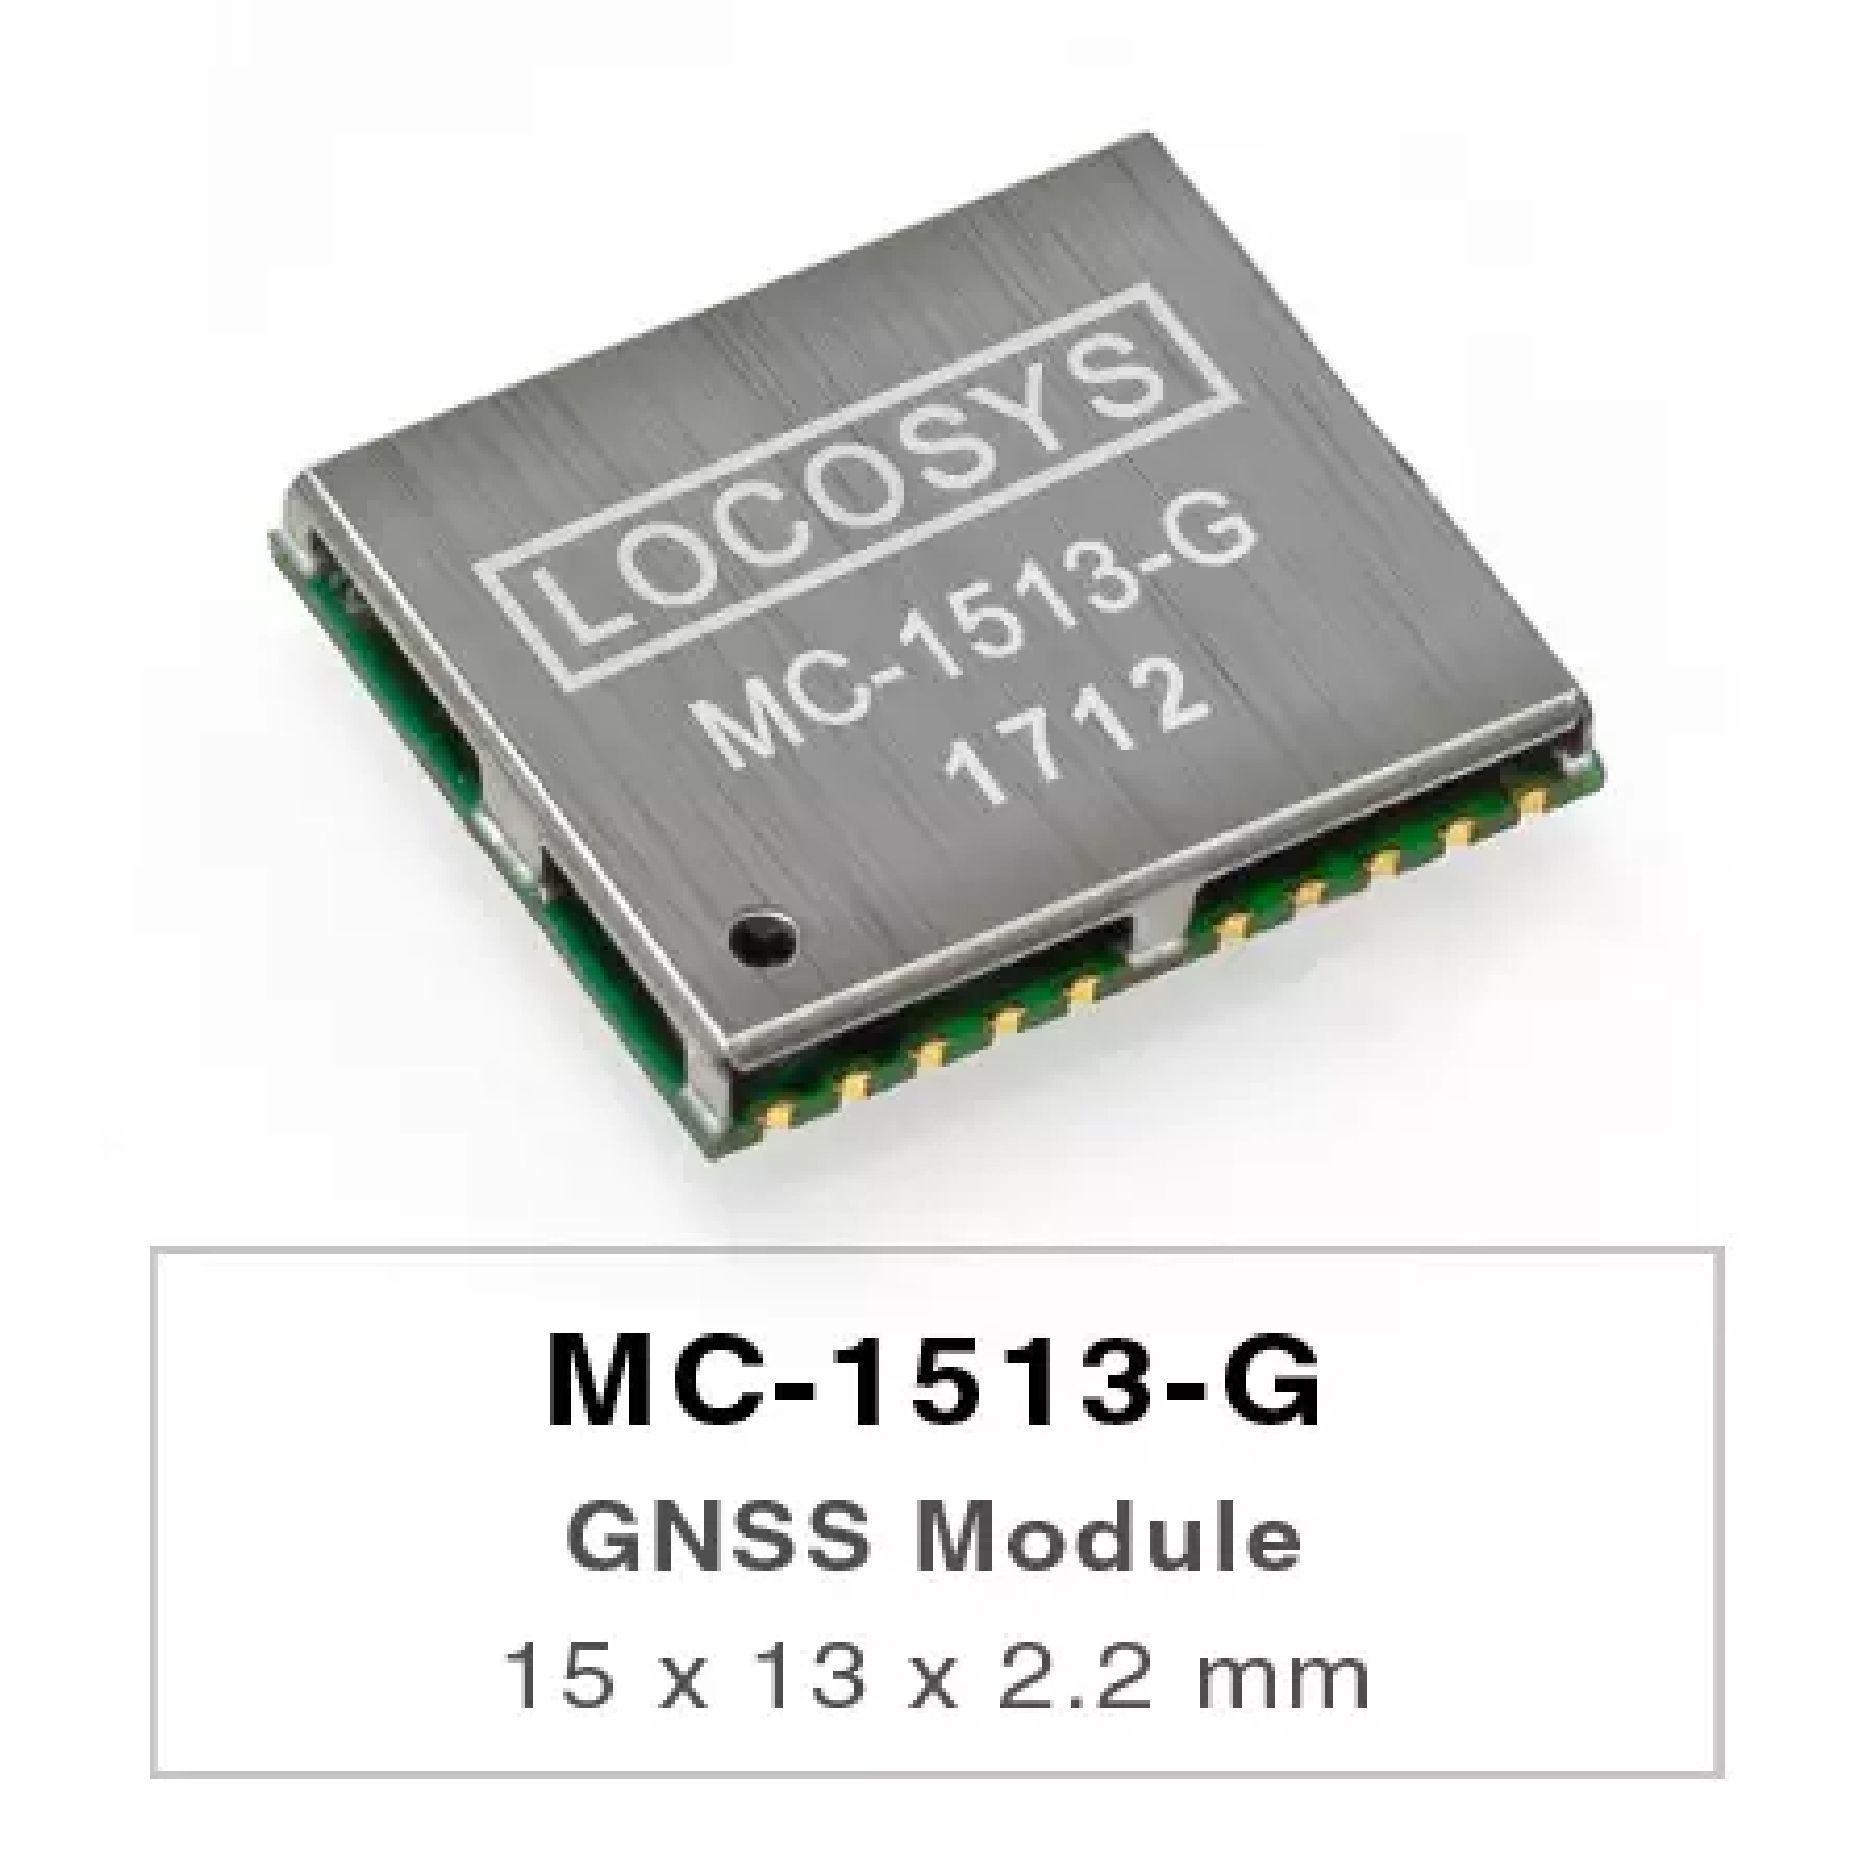 LOCOSYS MC-1513-G is a complete standalone GNSS module.